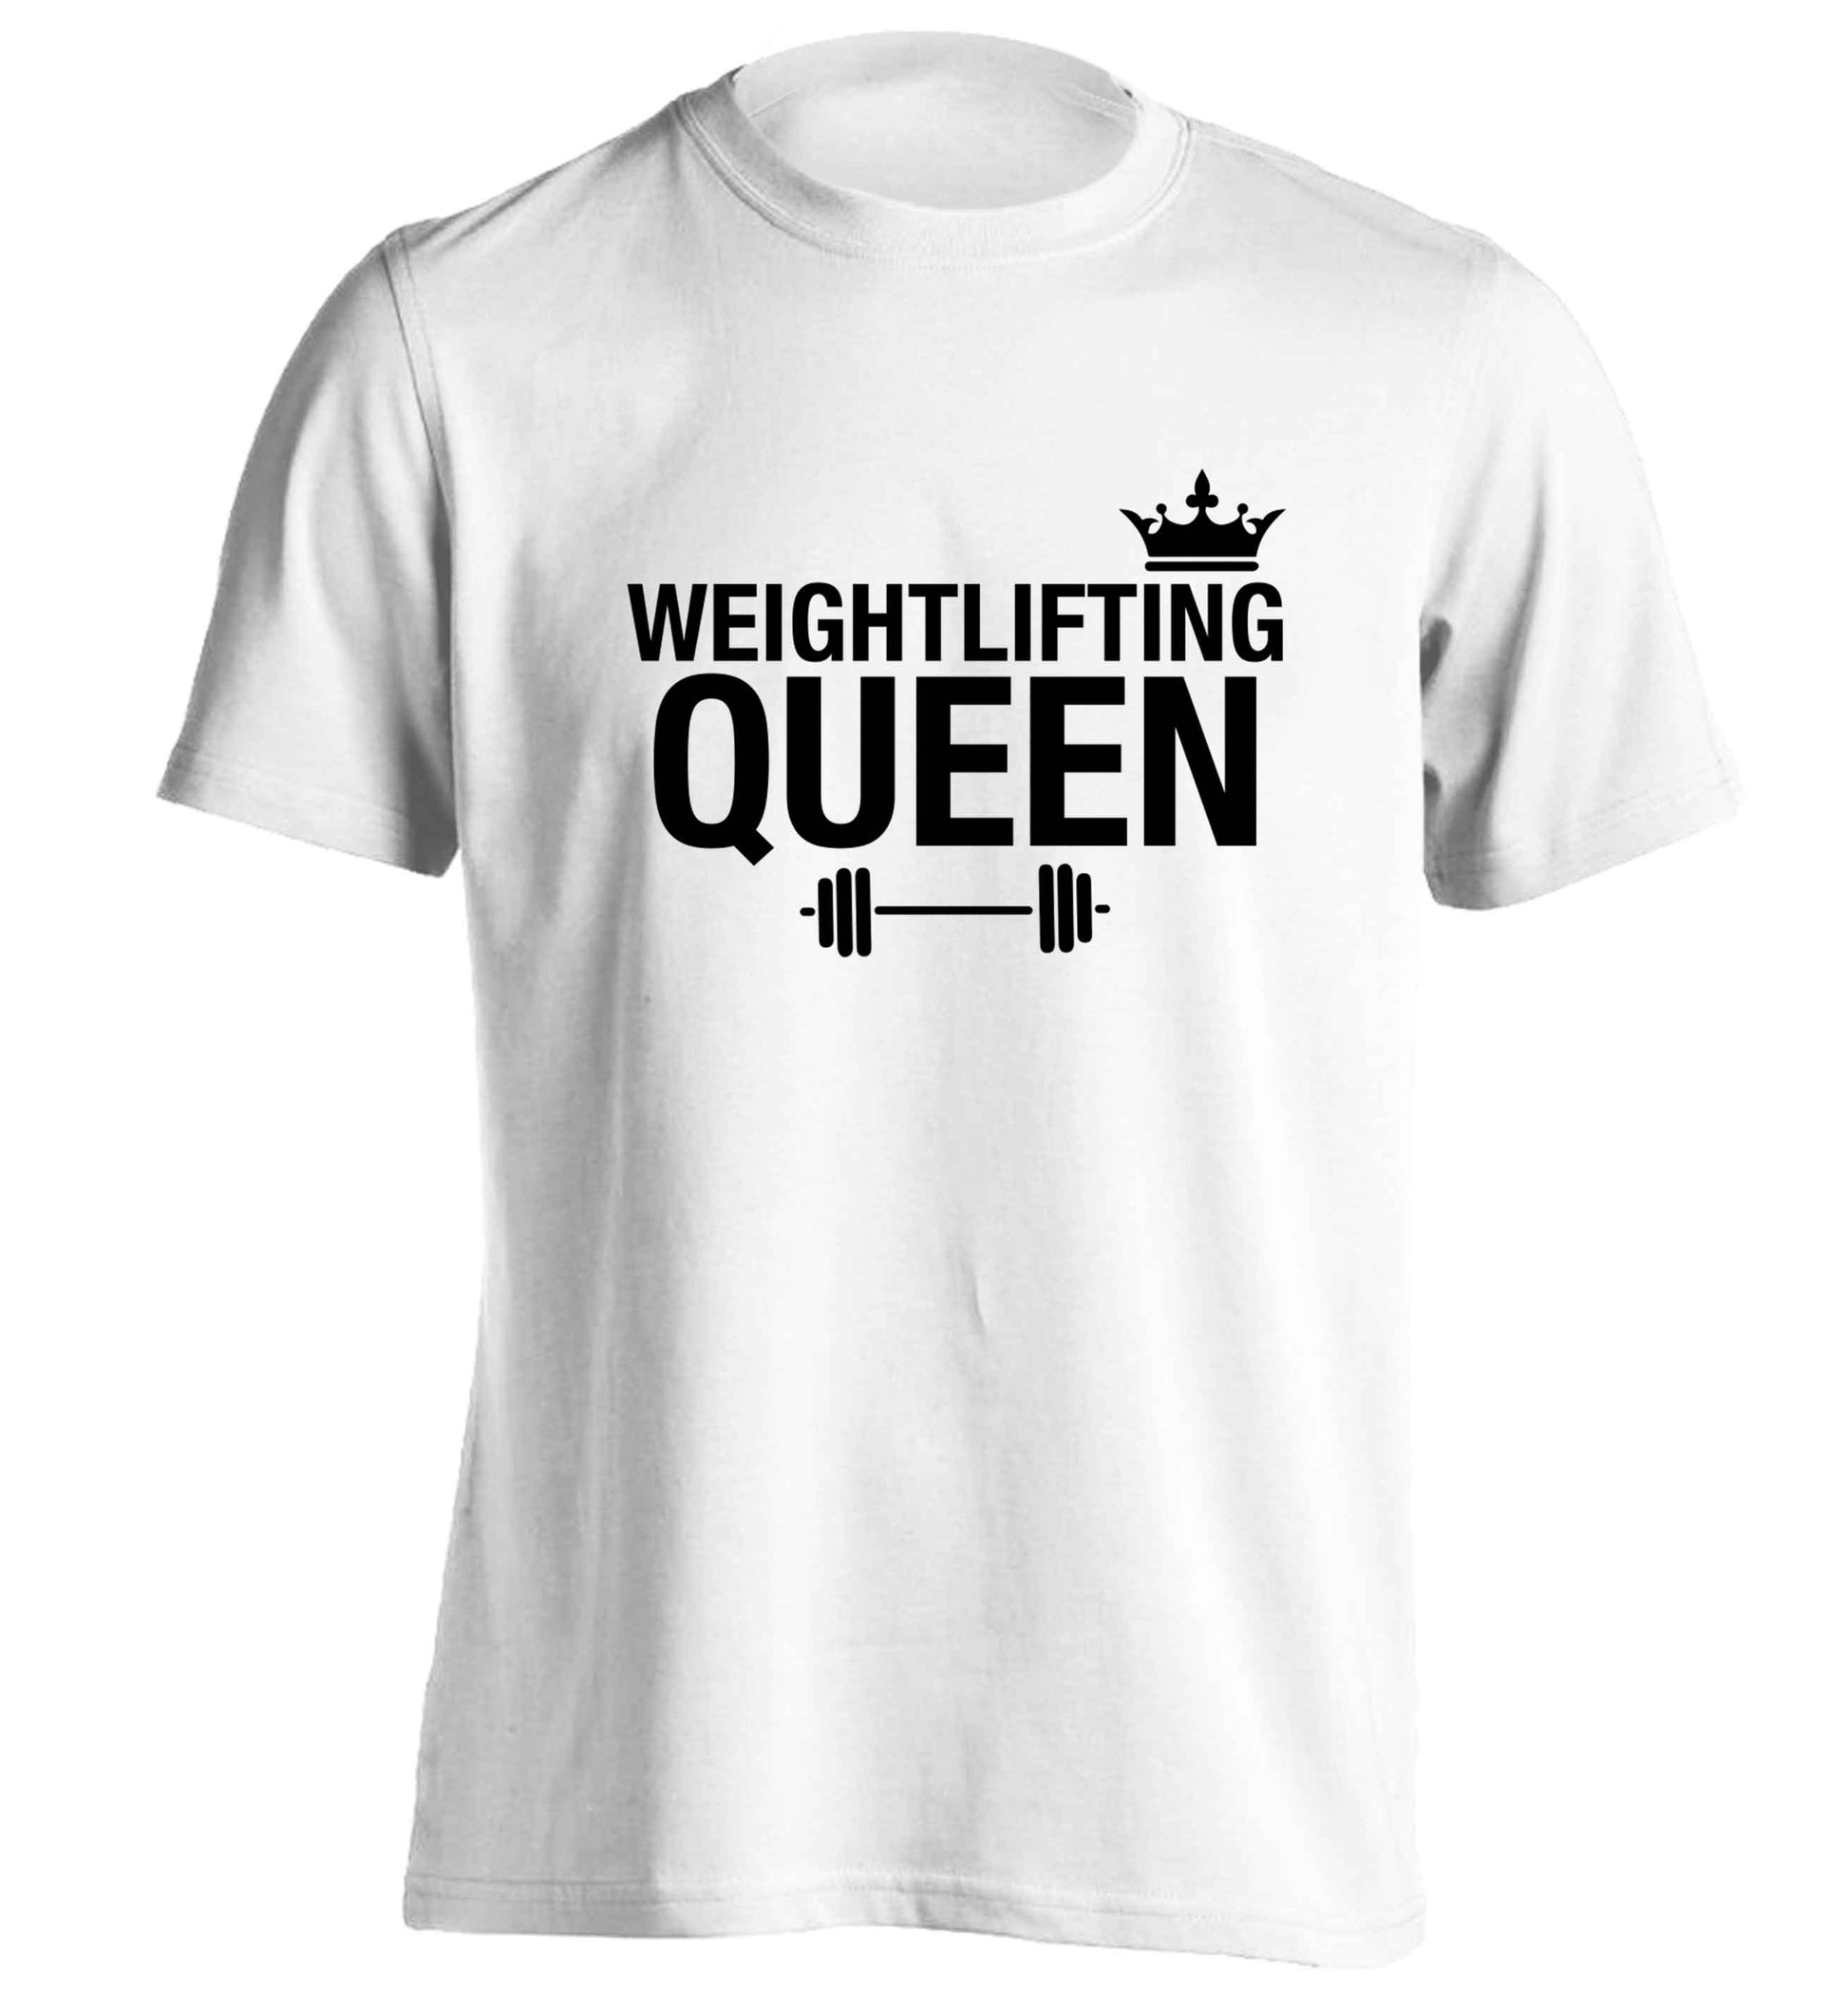 Weightlifting Queen adults unisex white Tshirt 2XL